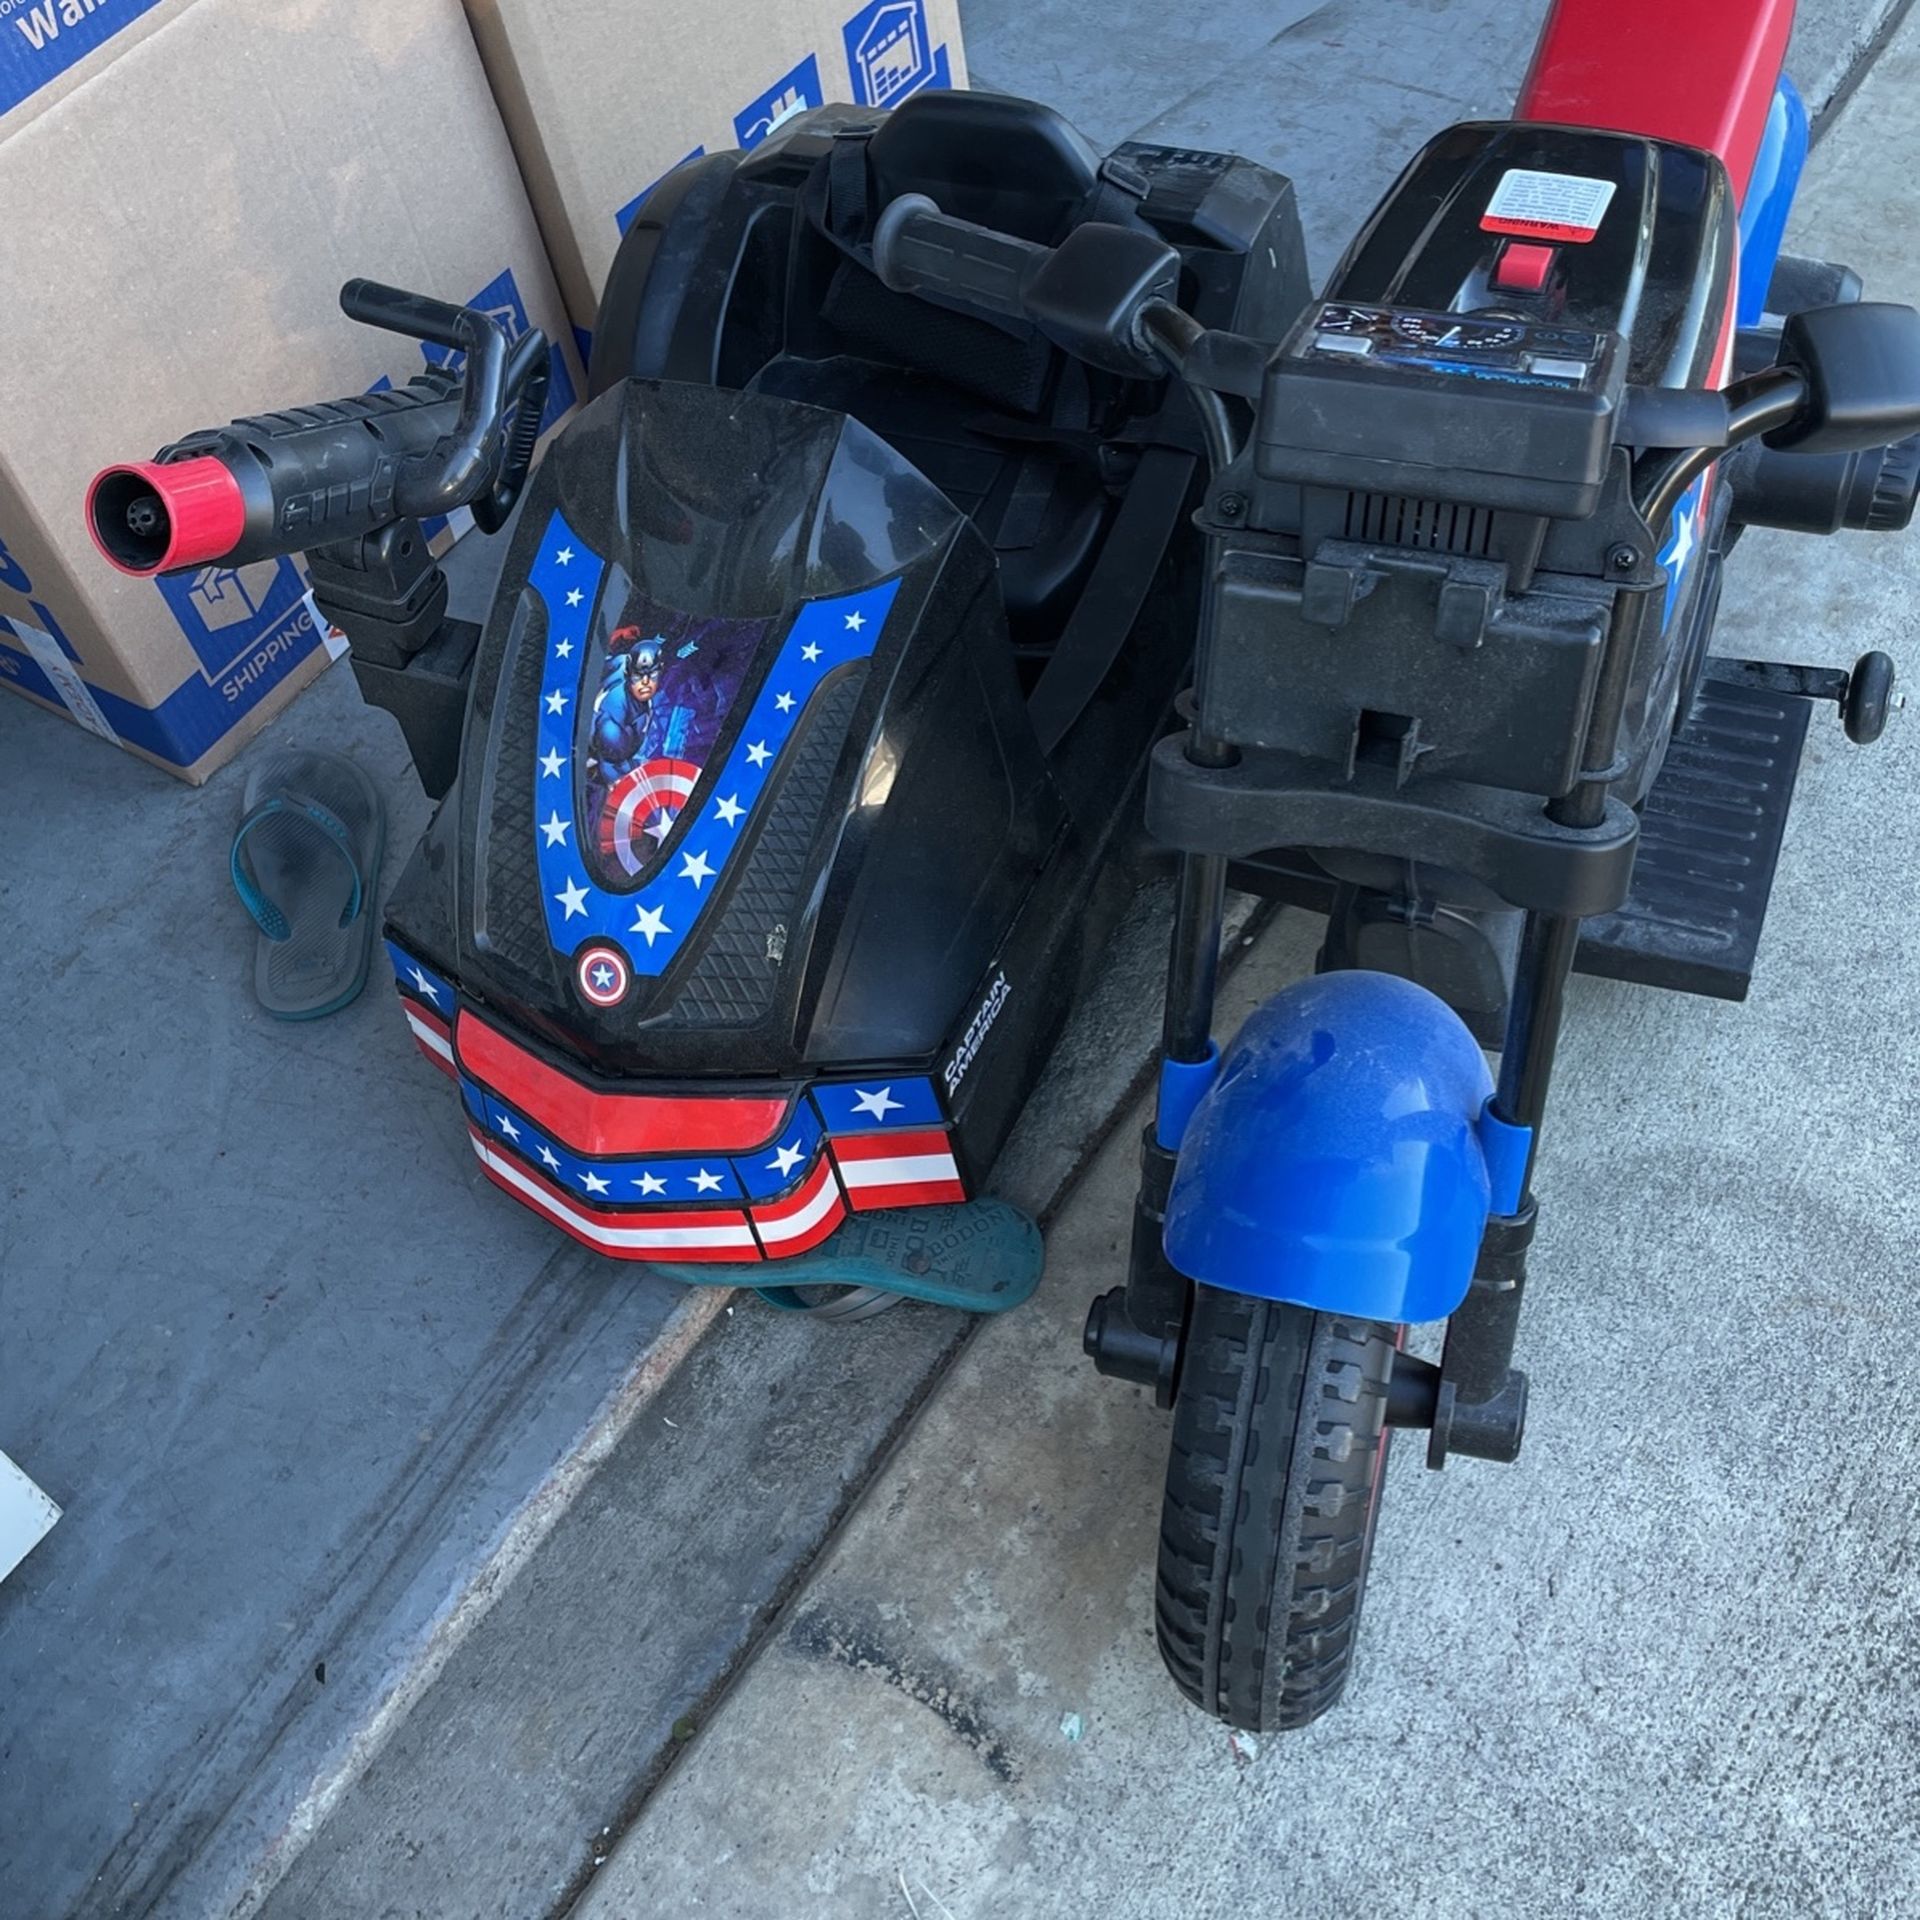 Marvel's Captain America Motorcycle and Sidecar, 12-Volt Ride-On